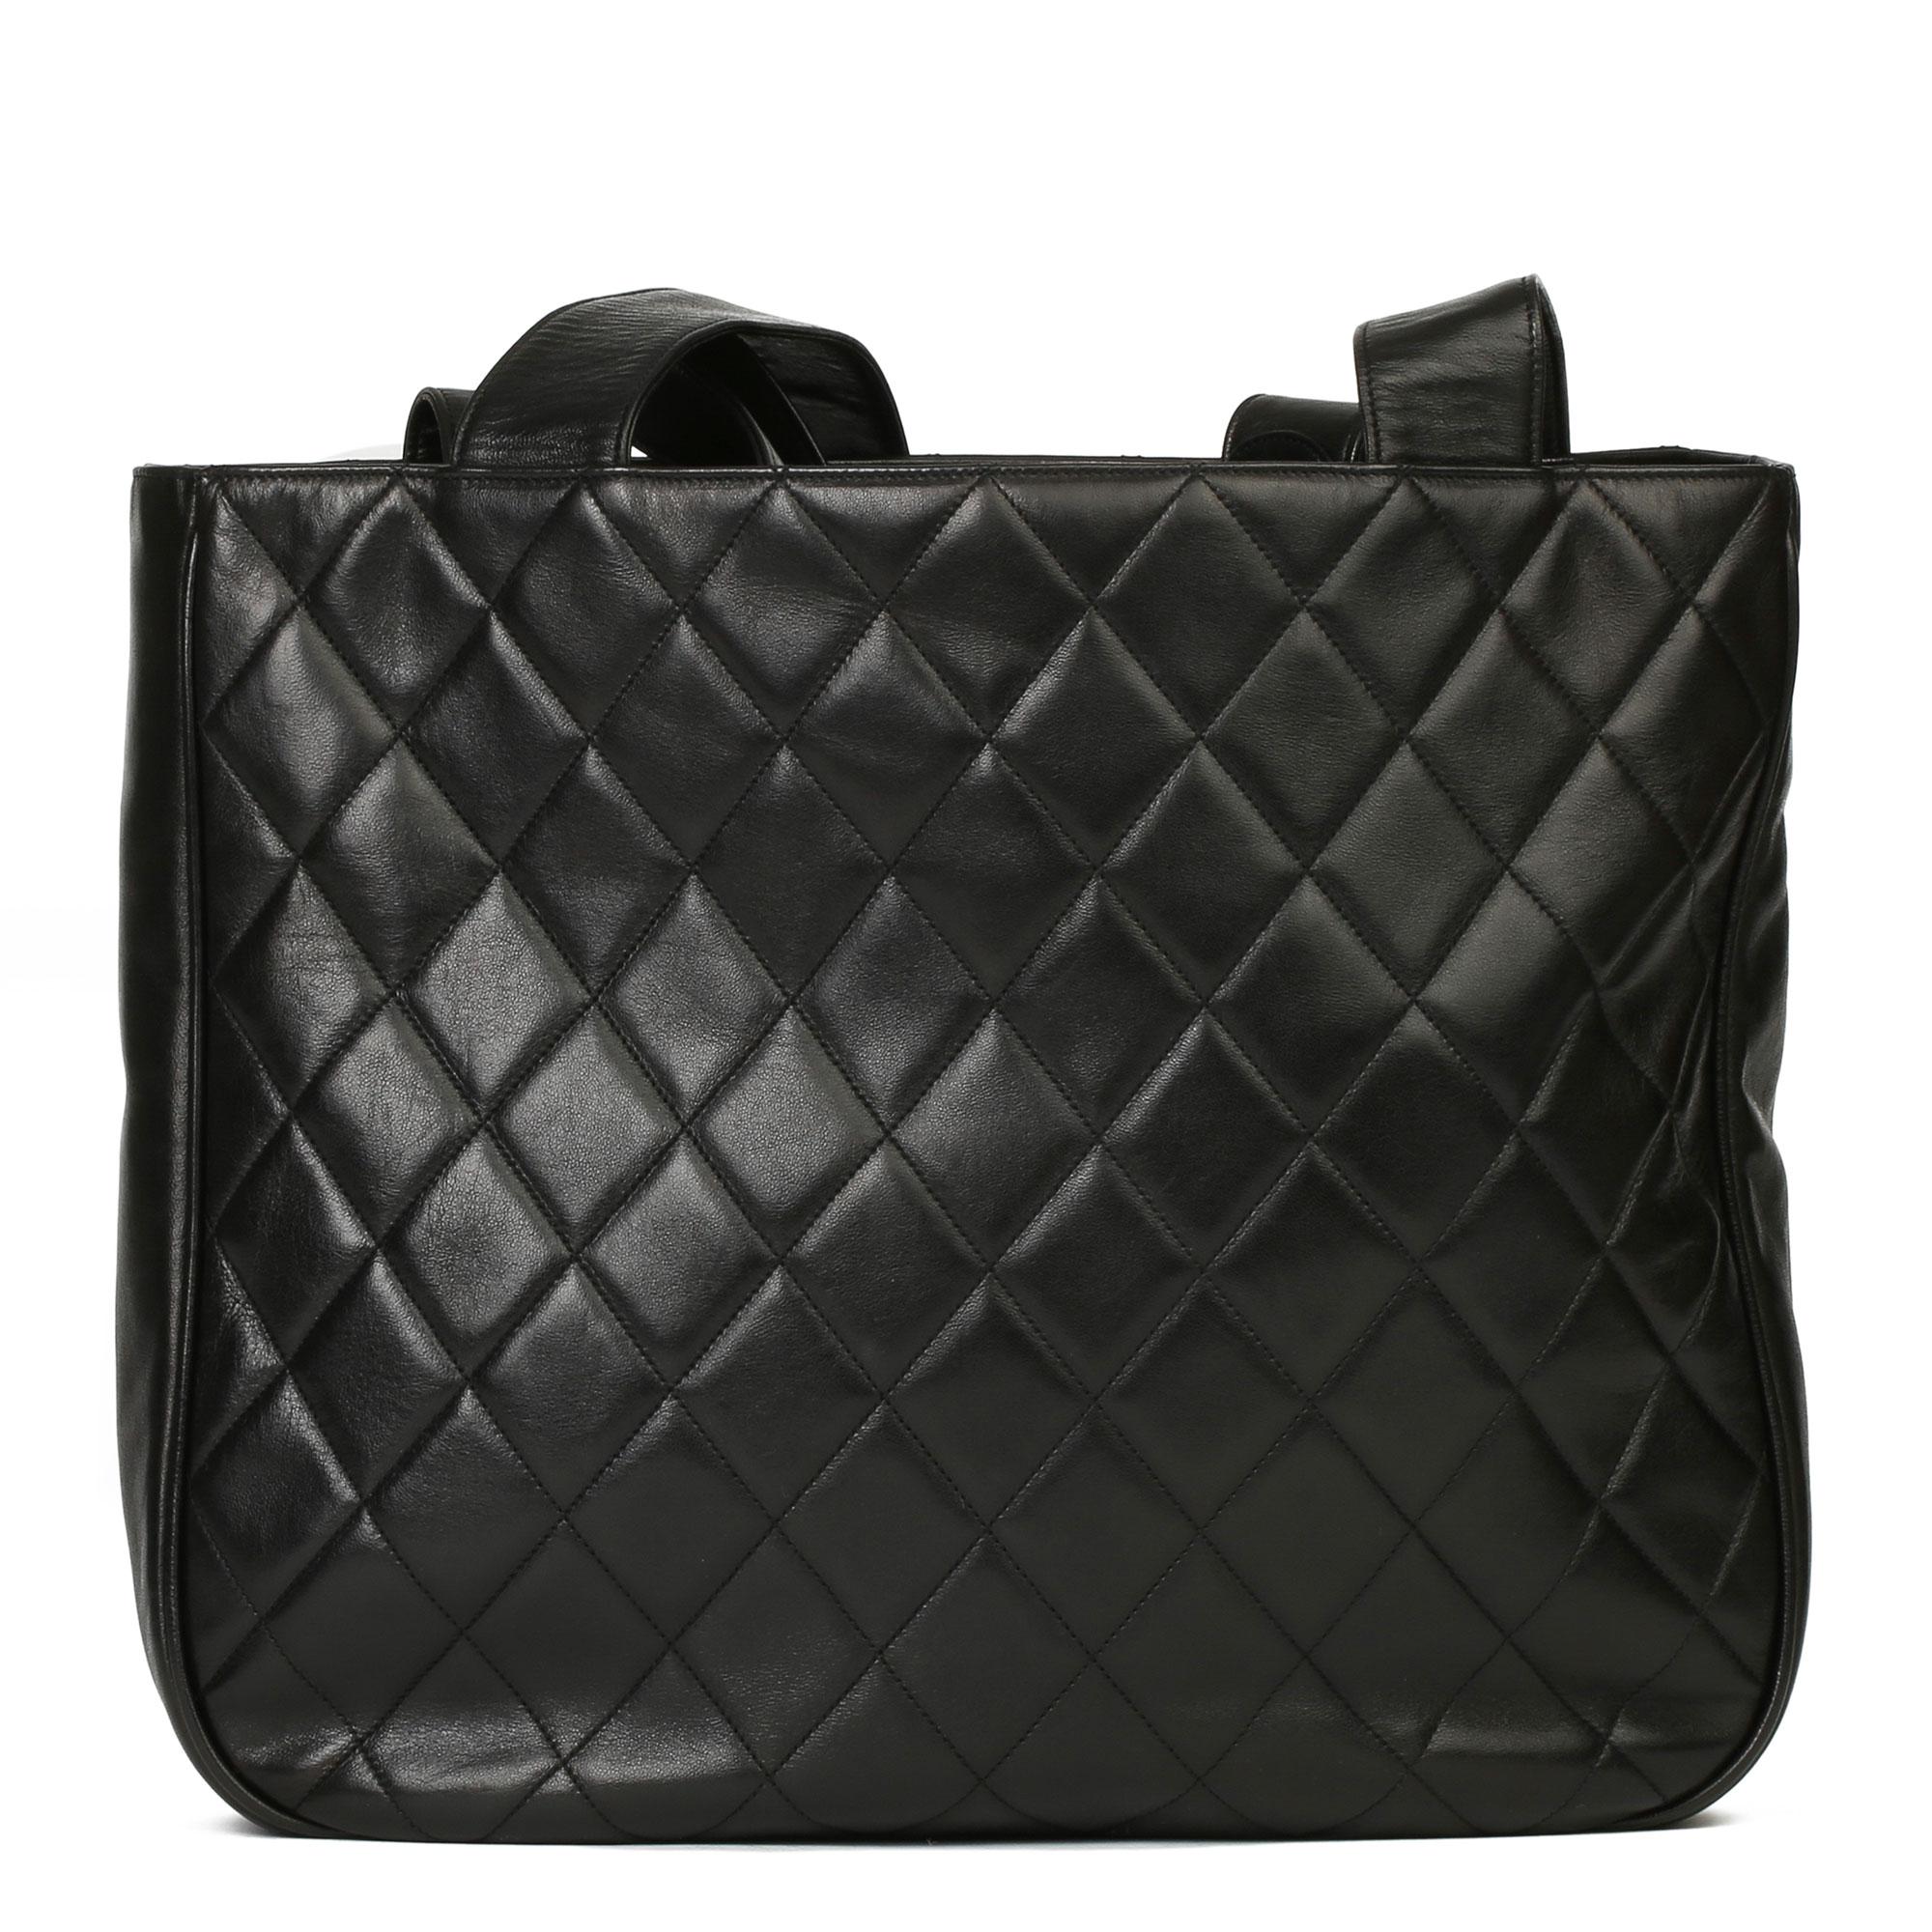 Chanel Black Quilted Lambskin Vintage Classic Shoulder Tote 1